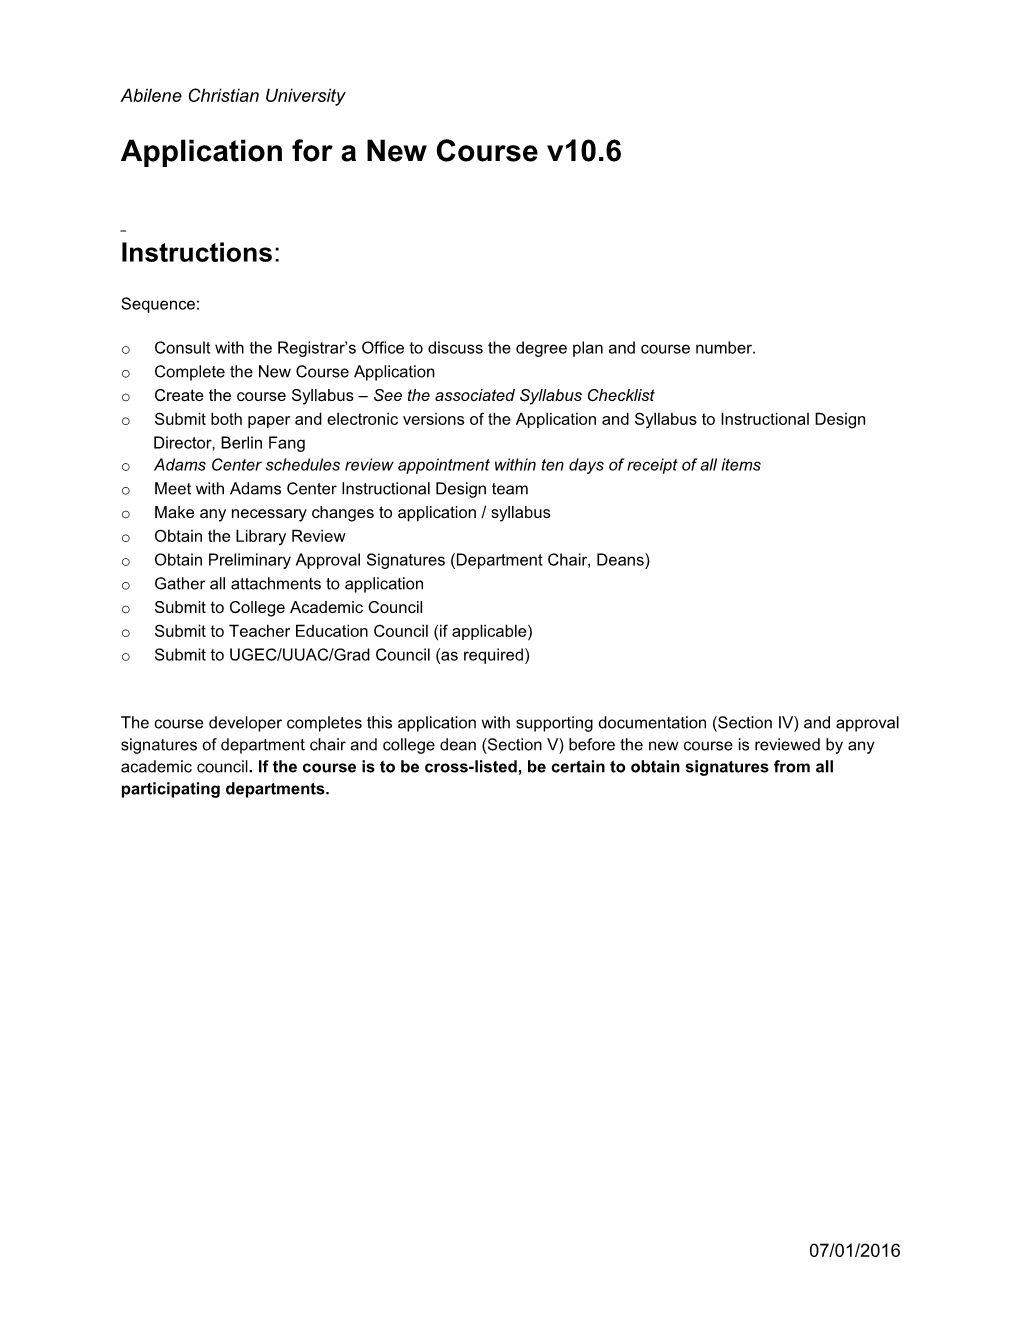 Application for a New Course V10.6